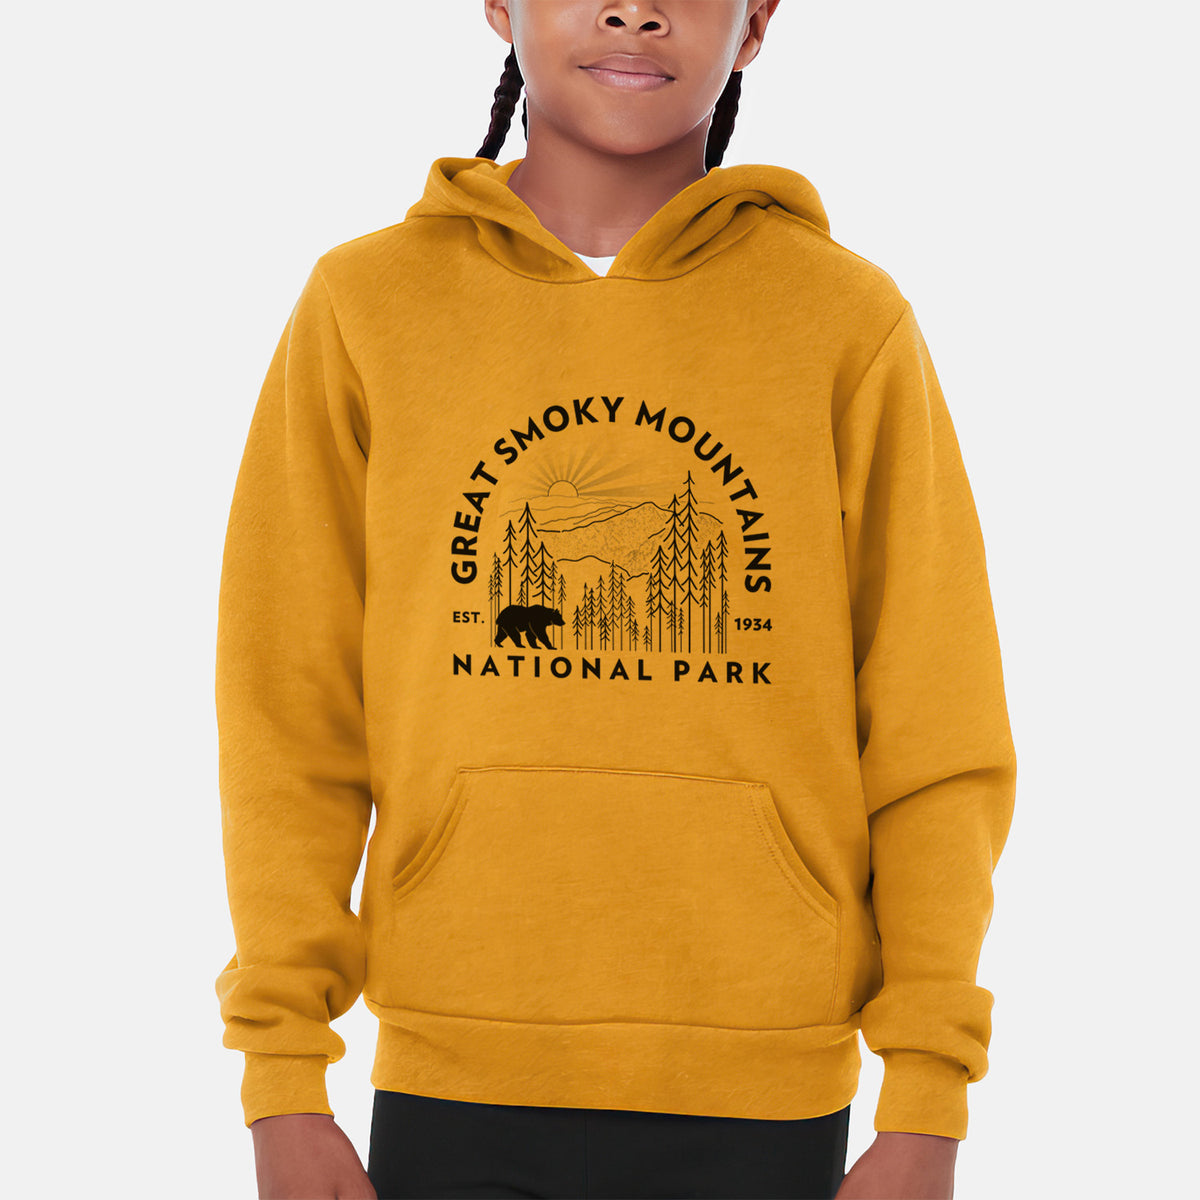 Great Smoky Mountains National Park - Youth Hoodie Sweatshirt